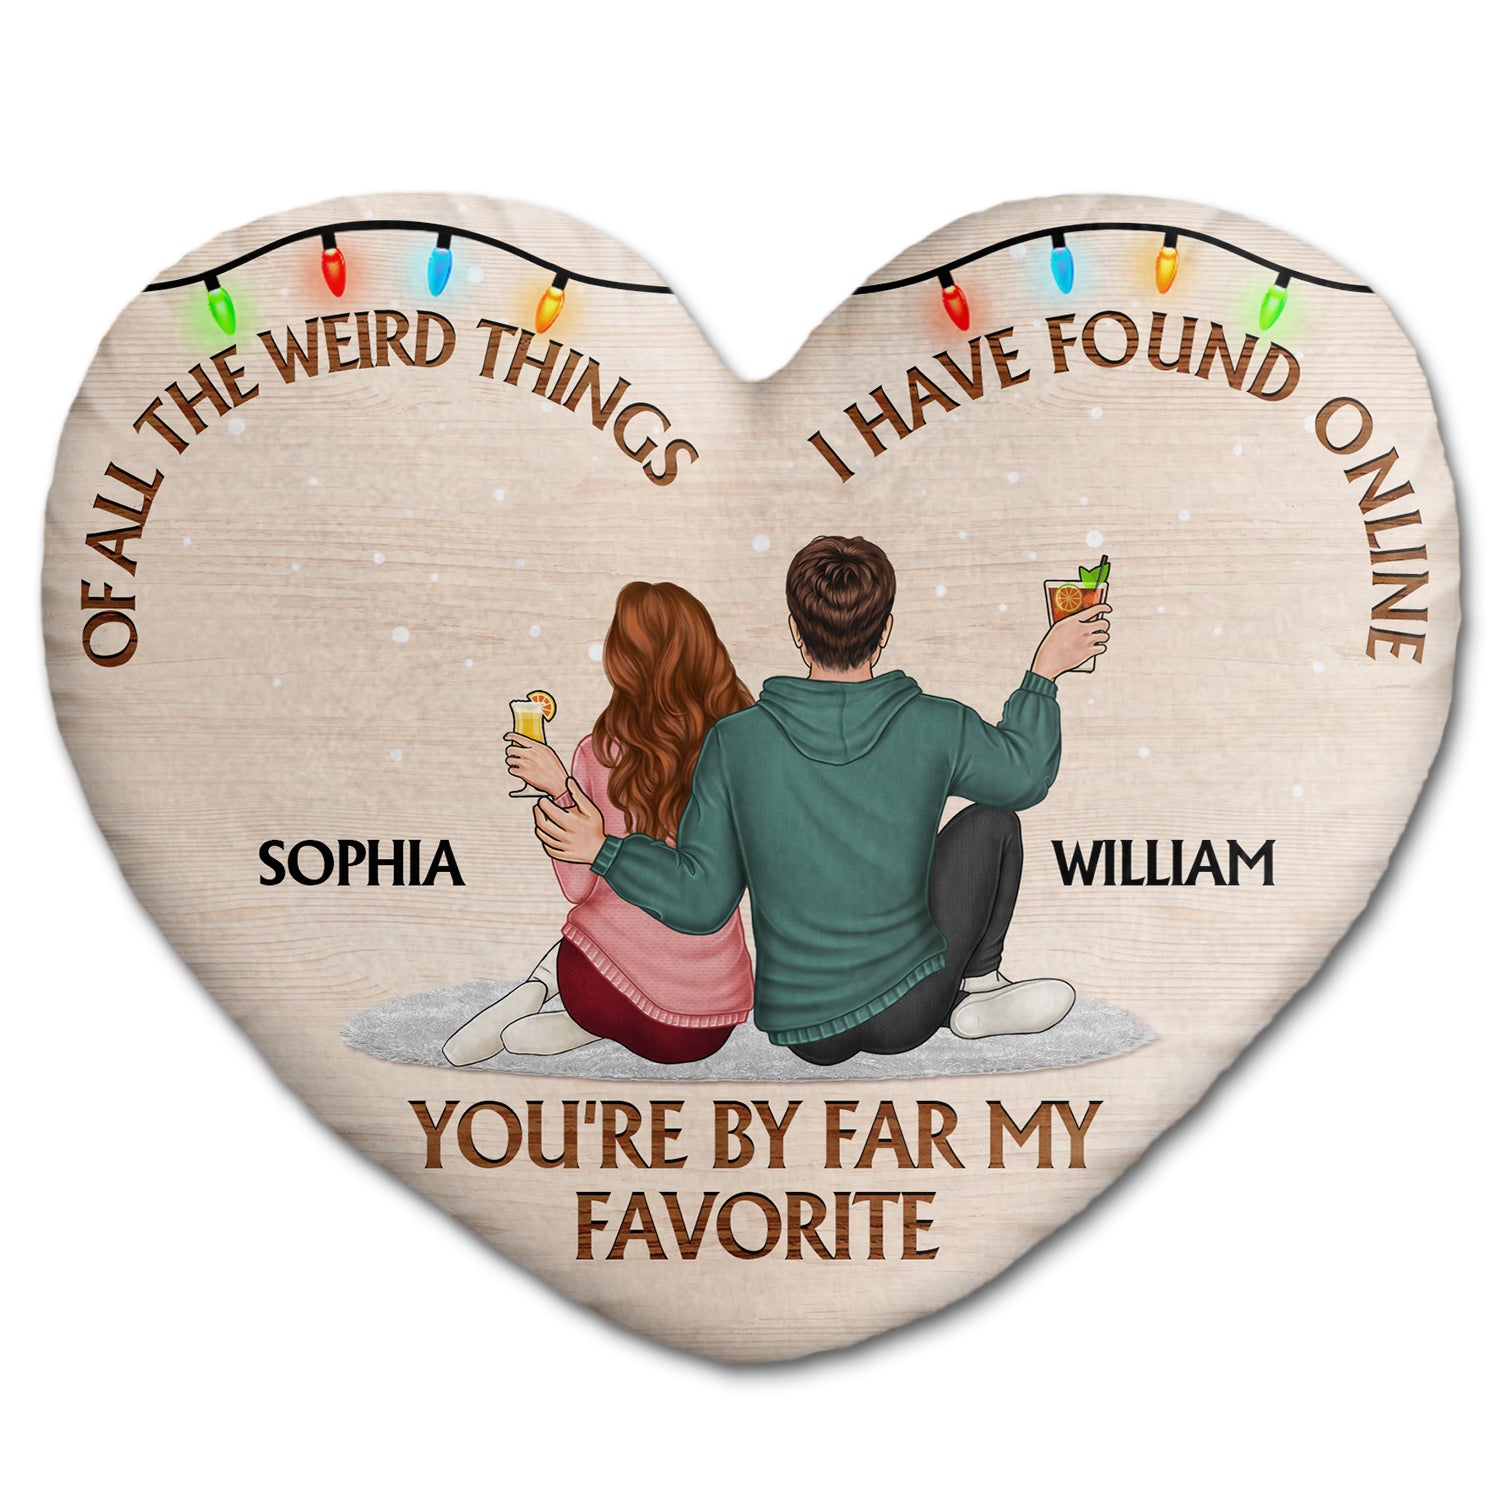 Of All The Weird Things - Gift For Couples, Husband, Wife - Personalized Heart Shaped Pillow